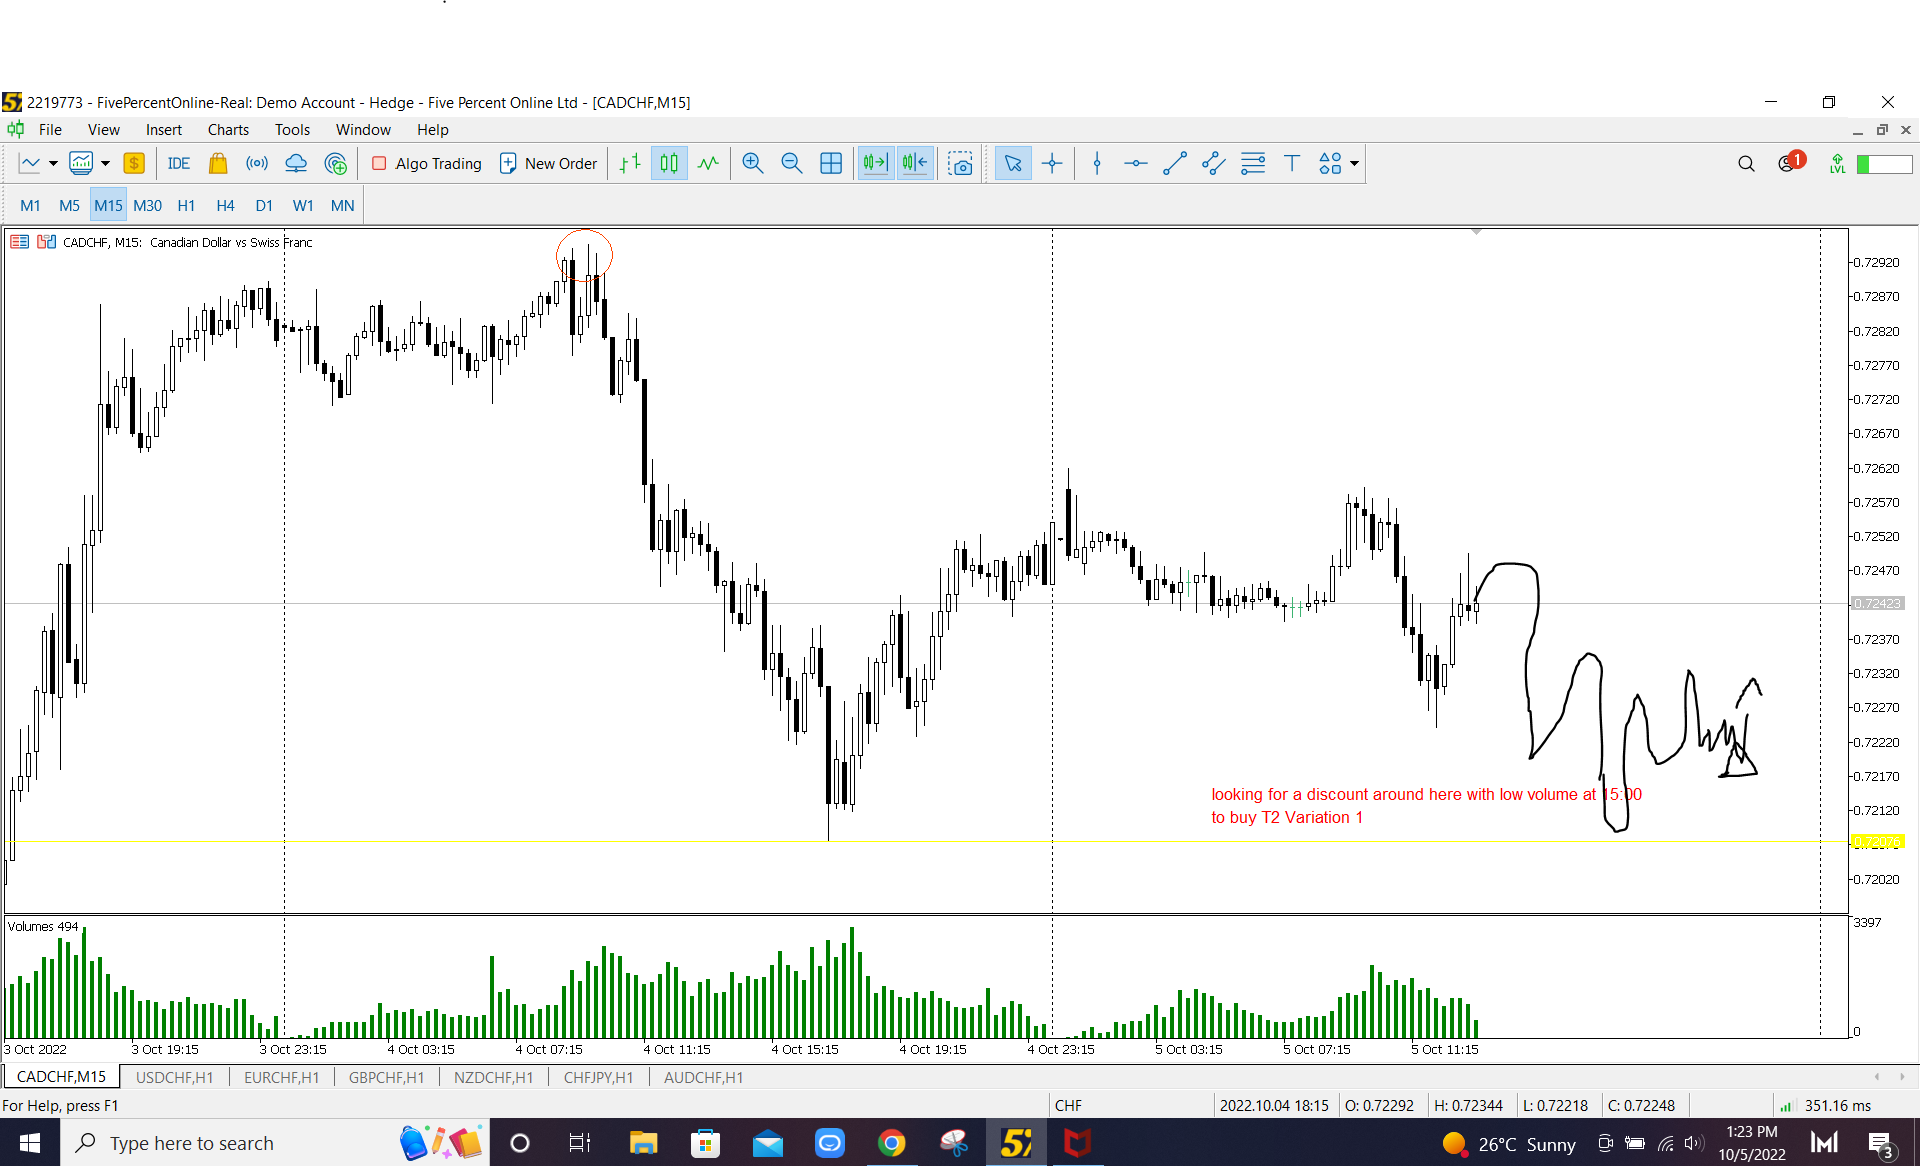 CAD/CHF M15 Continuation